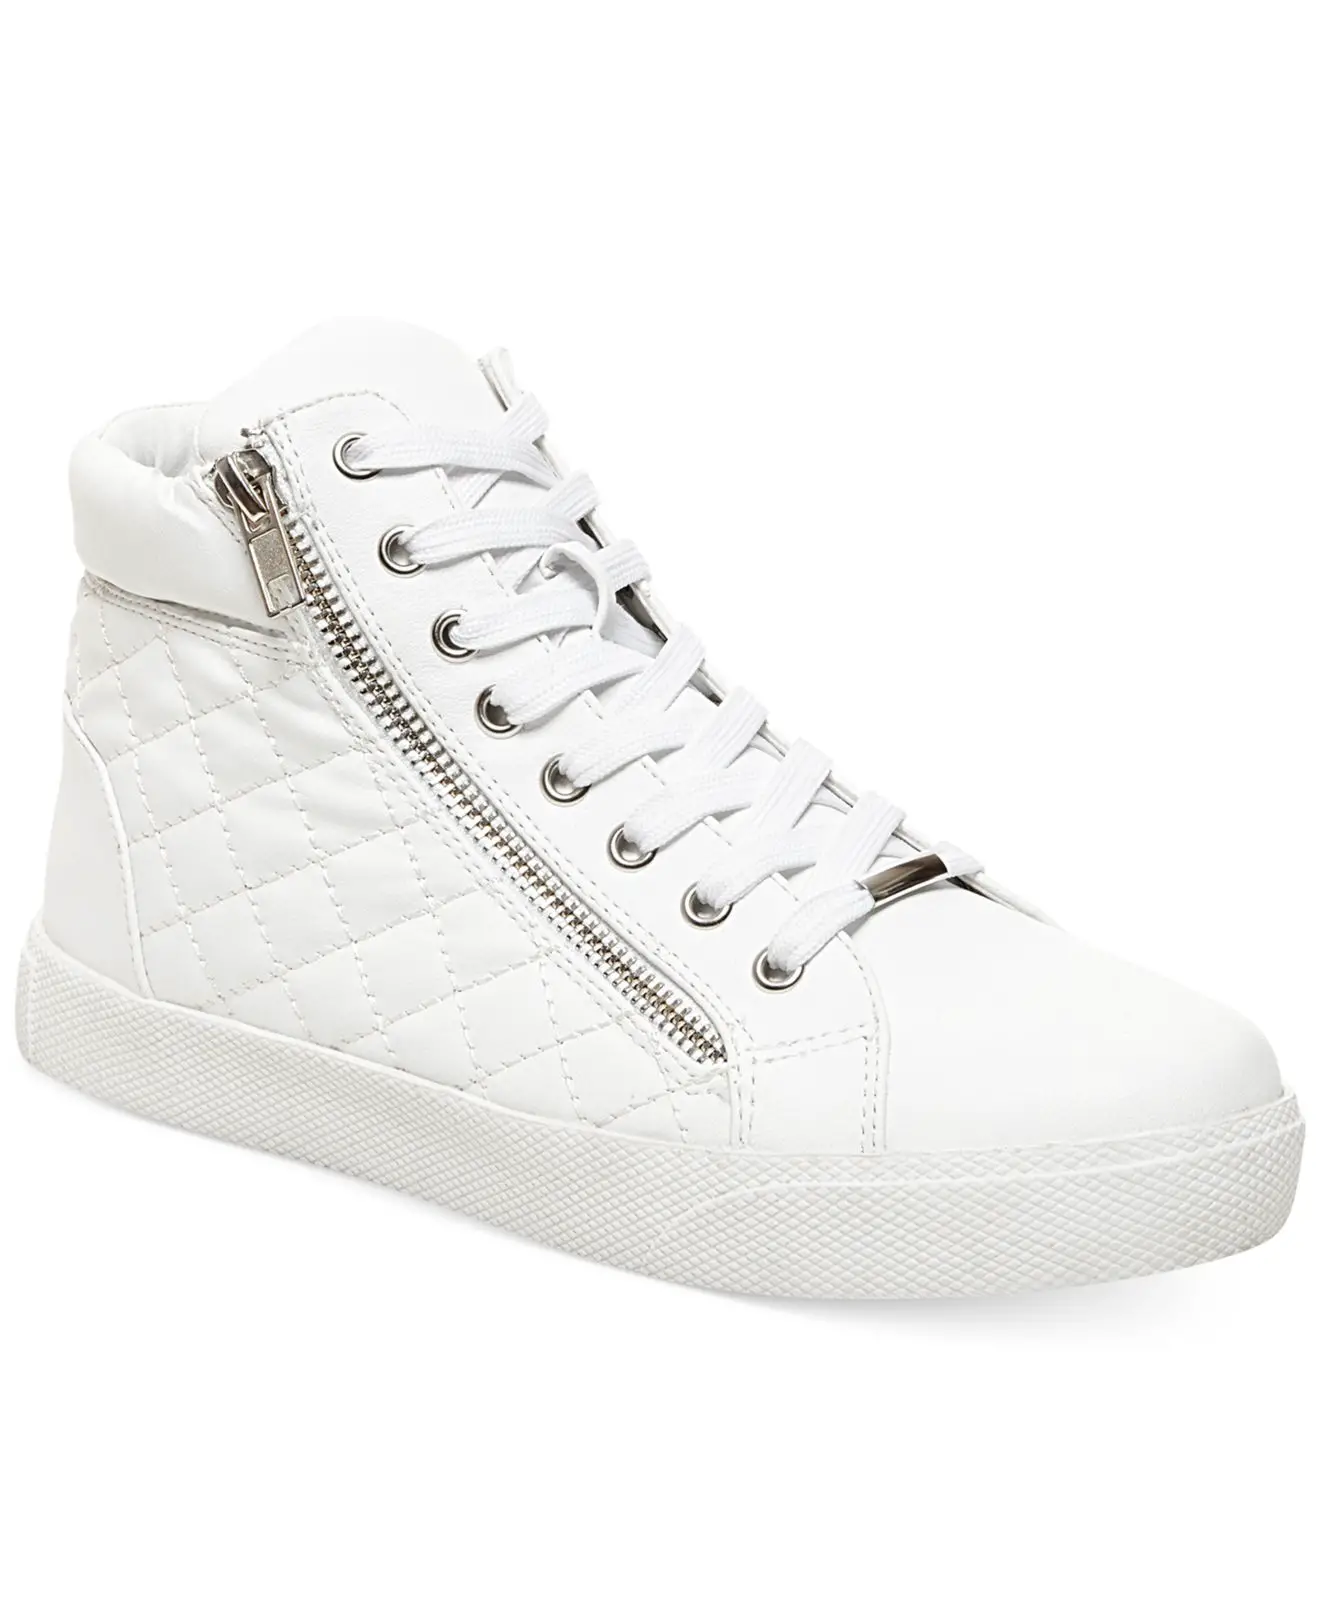 Steve Madden Decaf Hightop Quilted Platform Sneakers in White